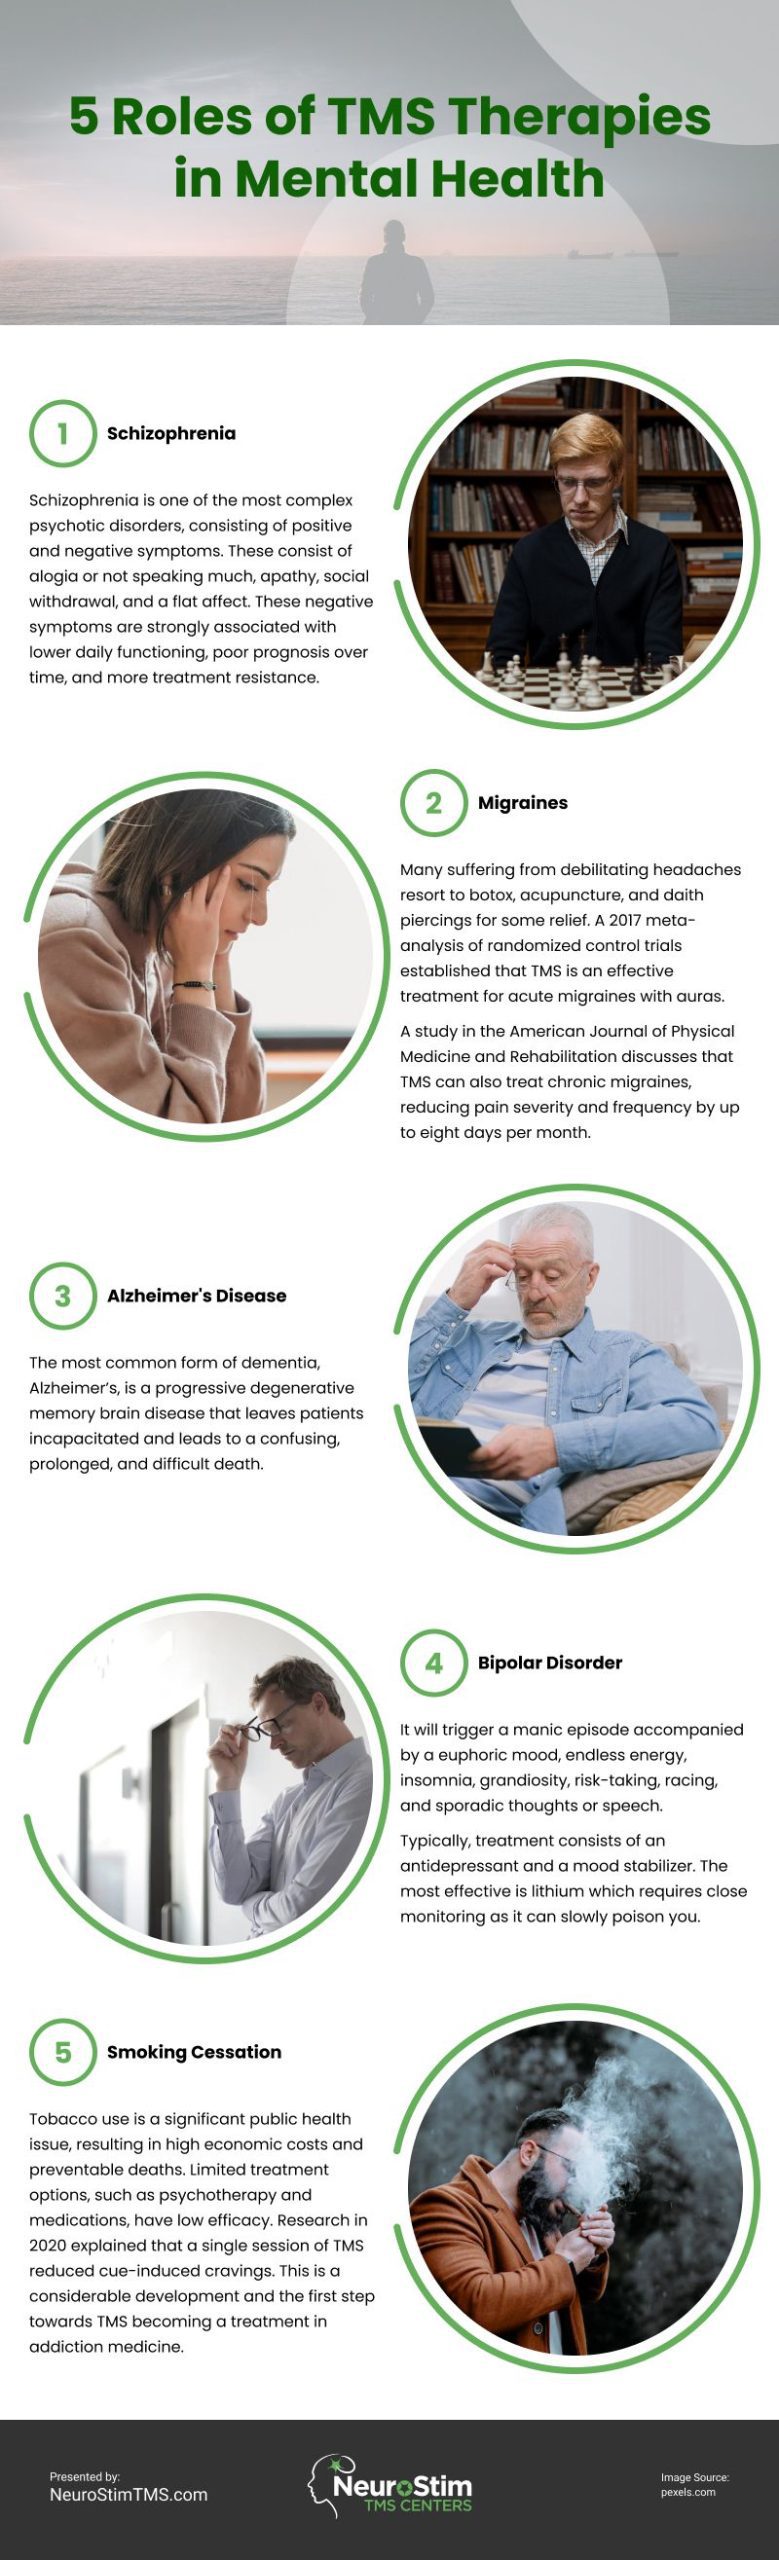 5 Roles of TMS Therapies in Mental Health Infographic